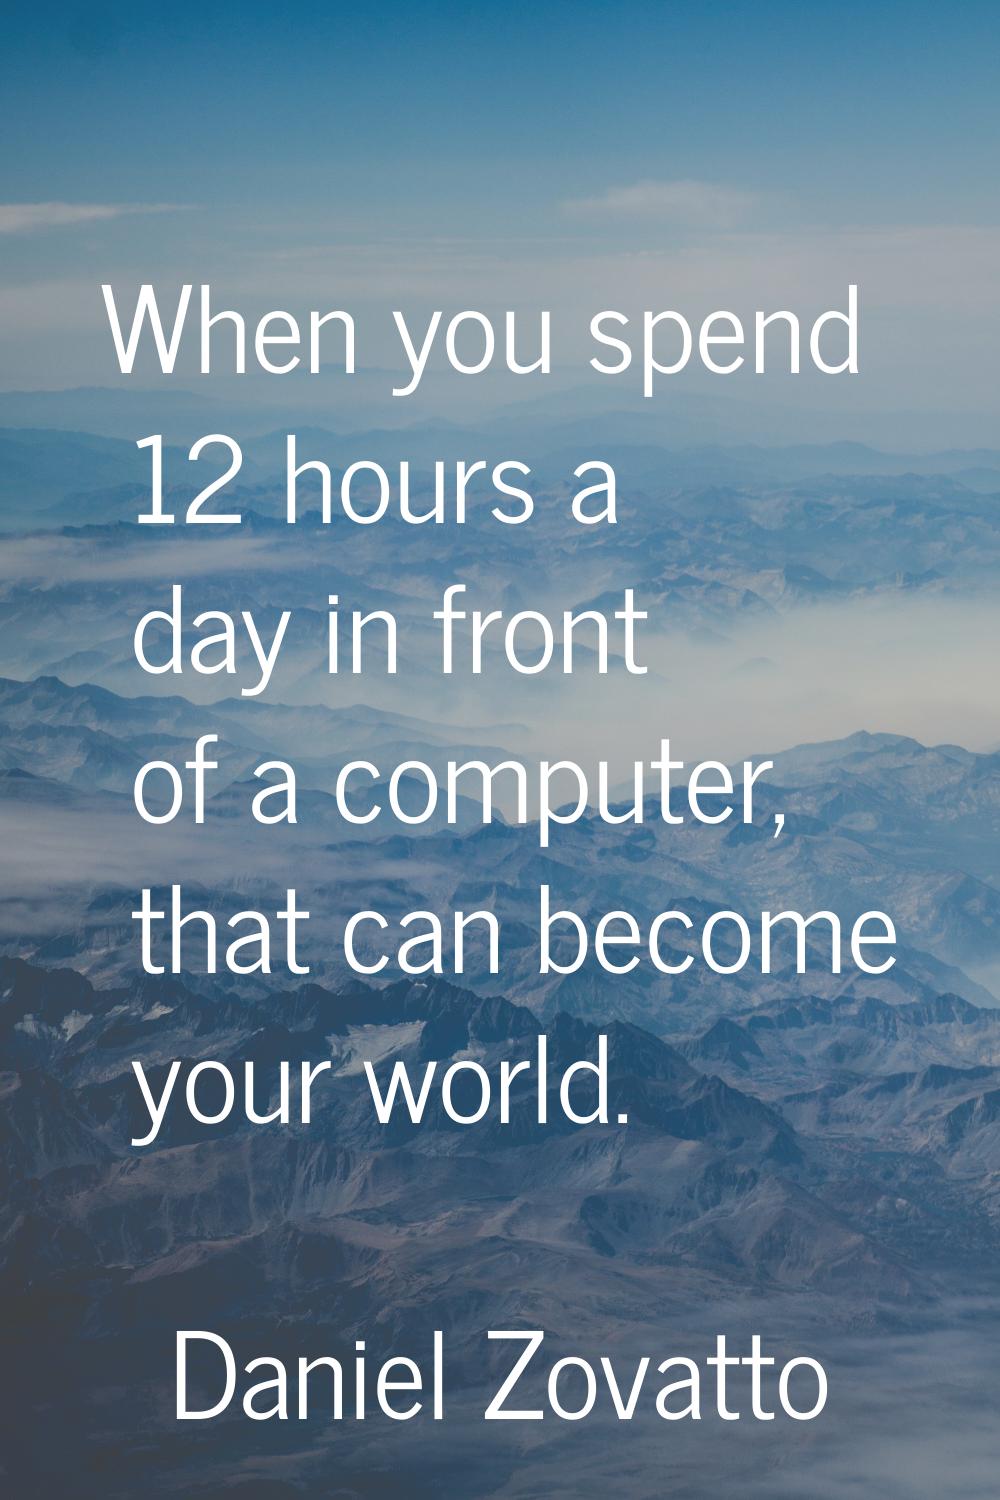 When you spend 12 hours a day in front of a computer, that can become your world.